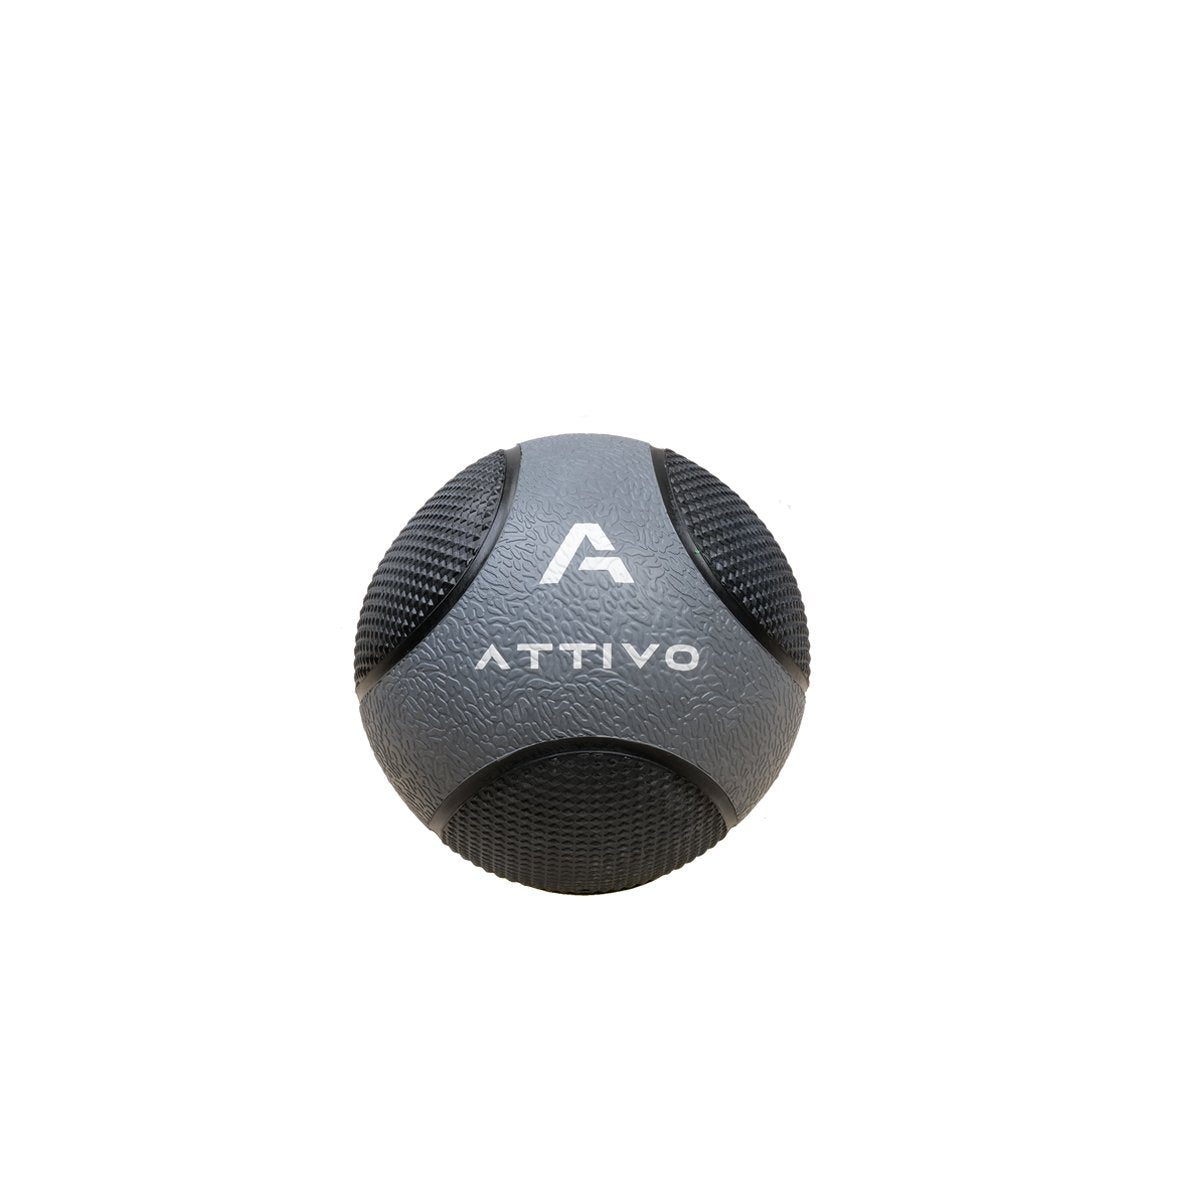 ATTIVO Medicine Ball for Workouts Exercise Balance Training - 1KG